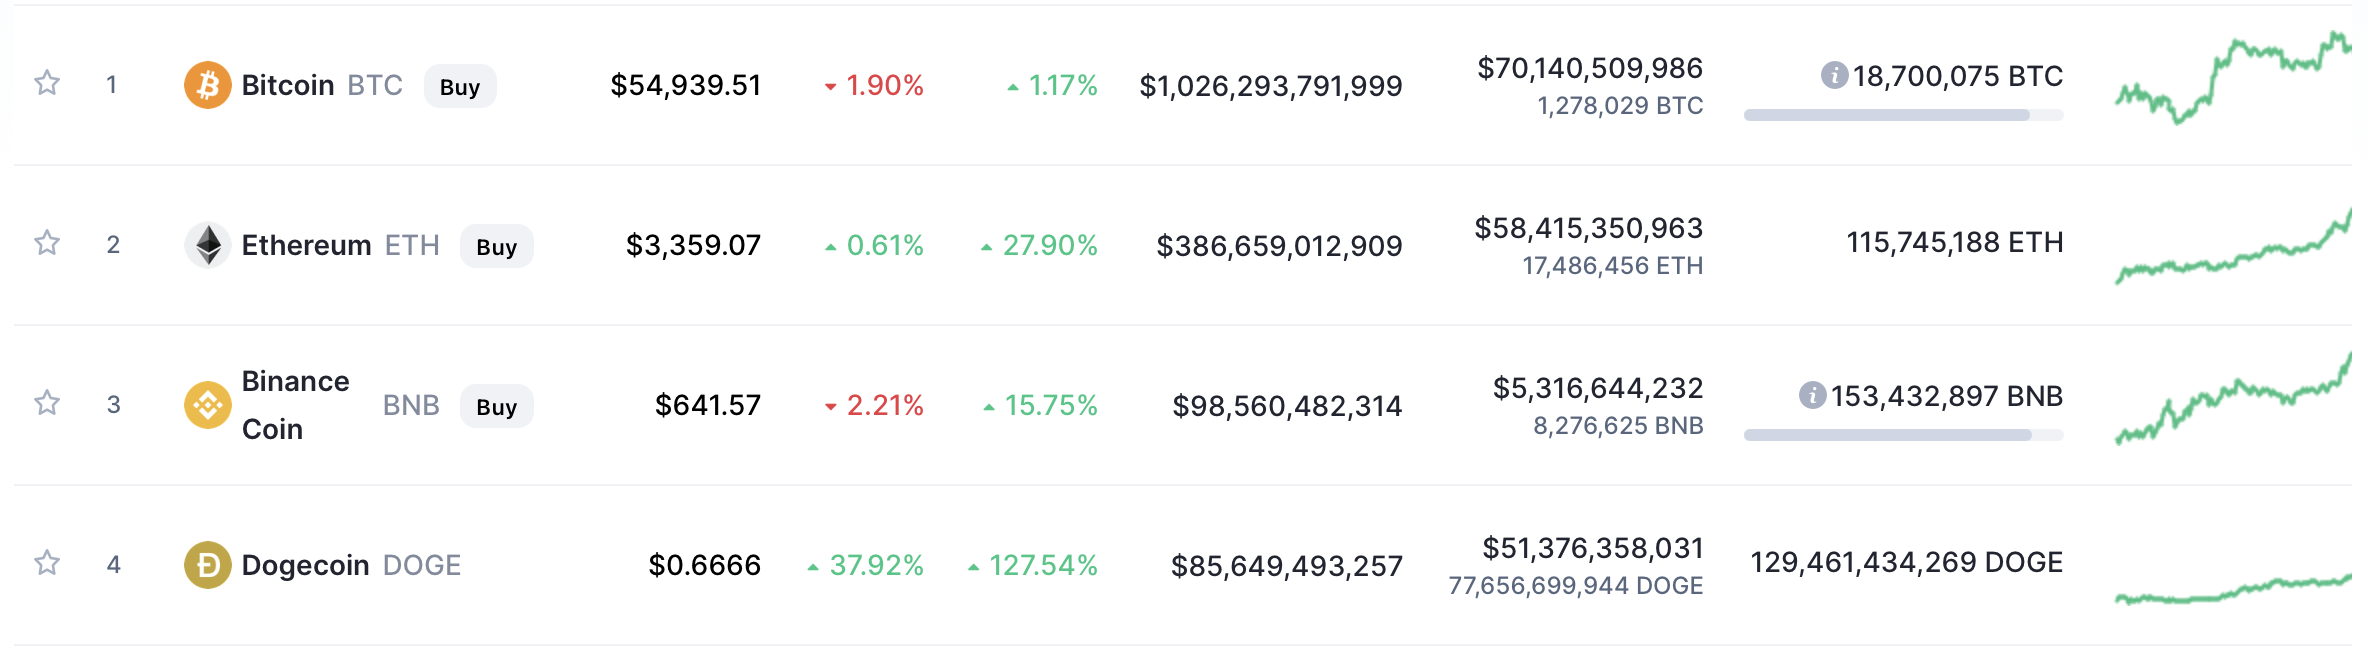 Dogecoin made it to 4th place CoinMarketCap